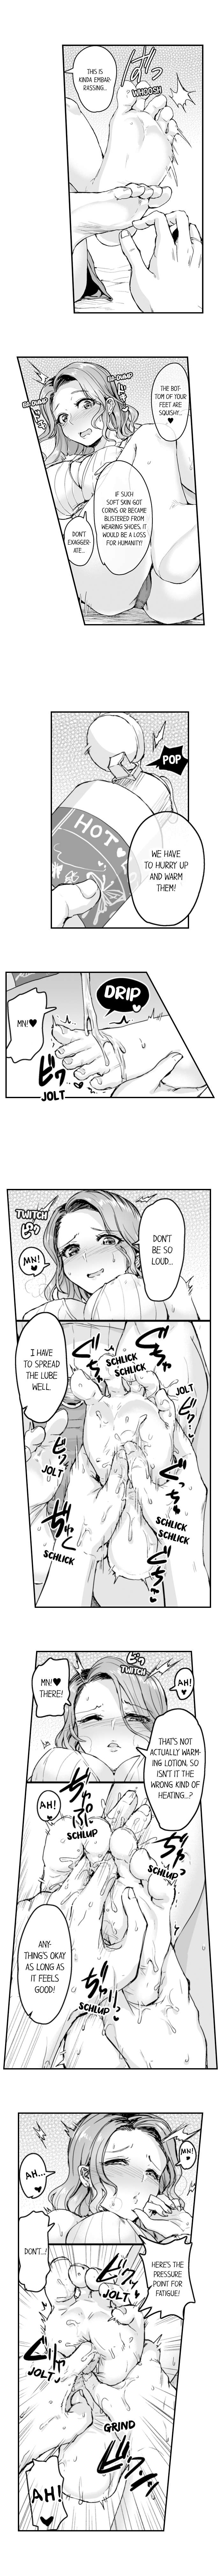 The Massage ♂♀ The Pleasure of Full Course Sex - Chapter 2 Page 4